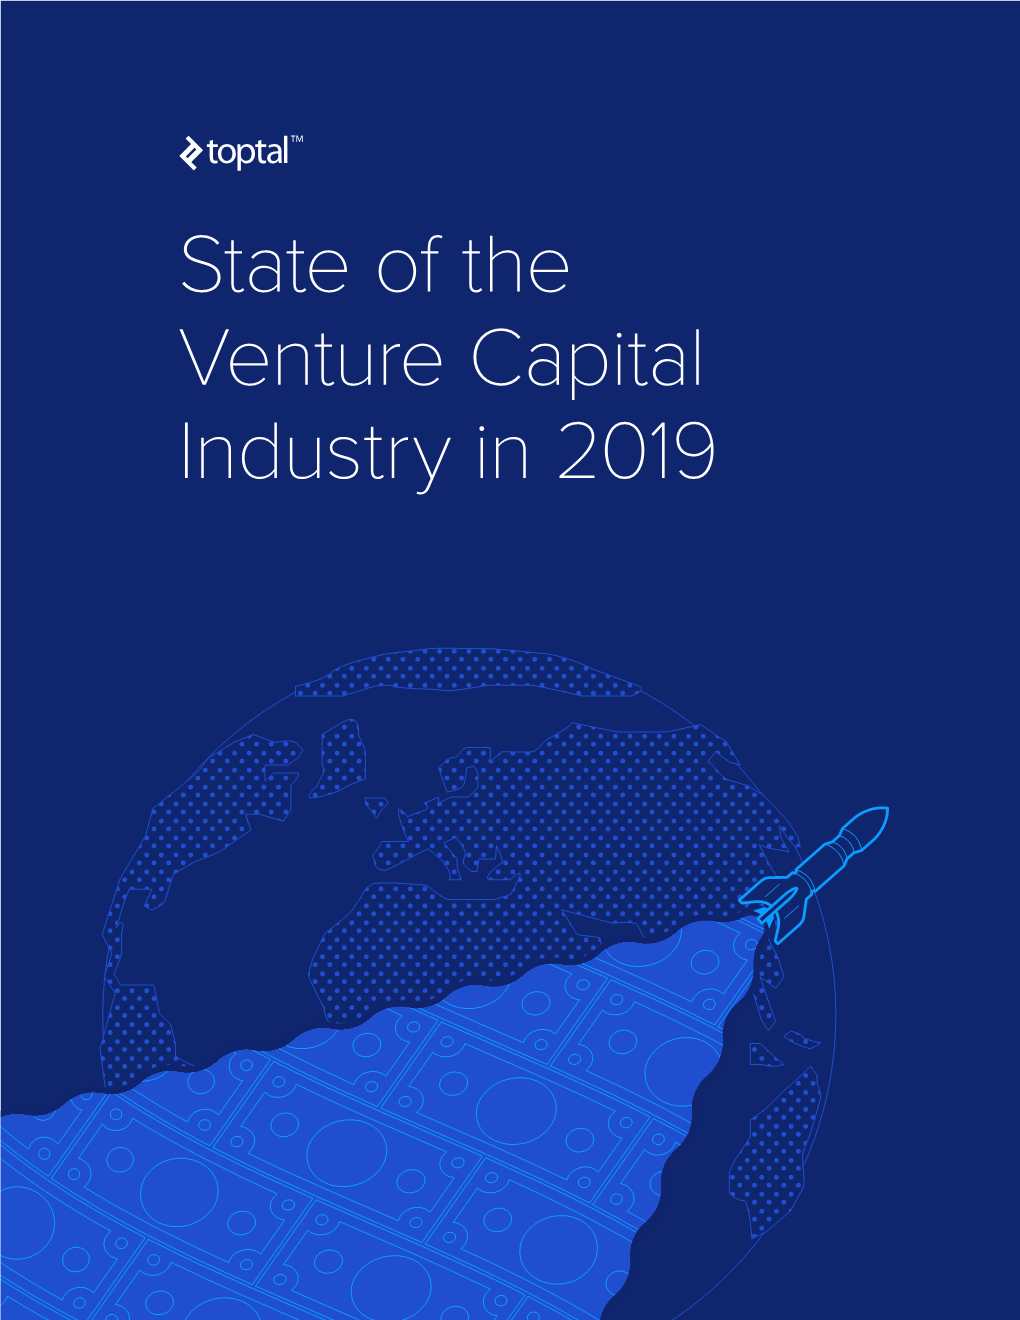 State of the Venture Capital Industry in 2019